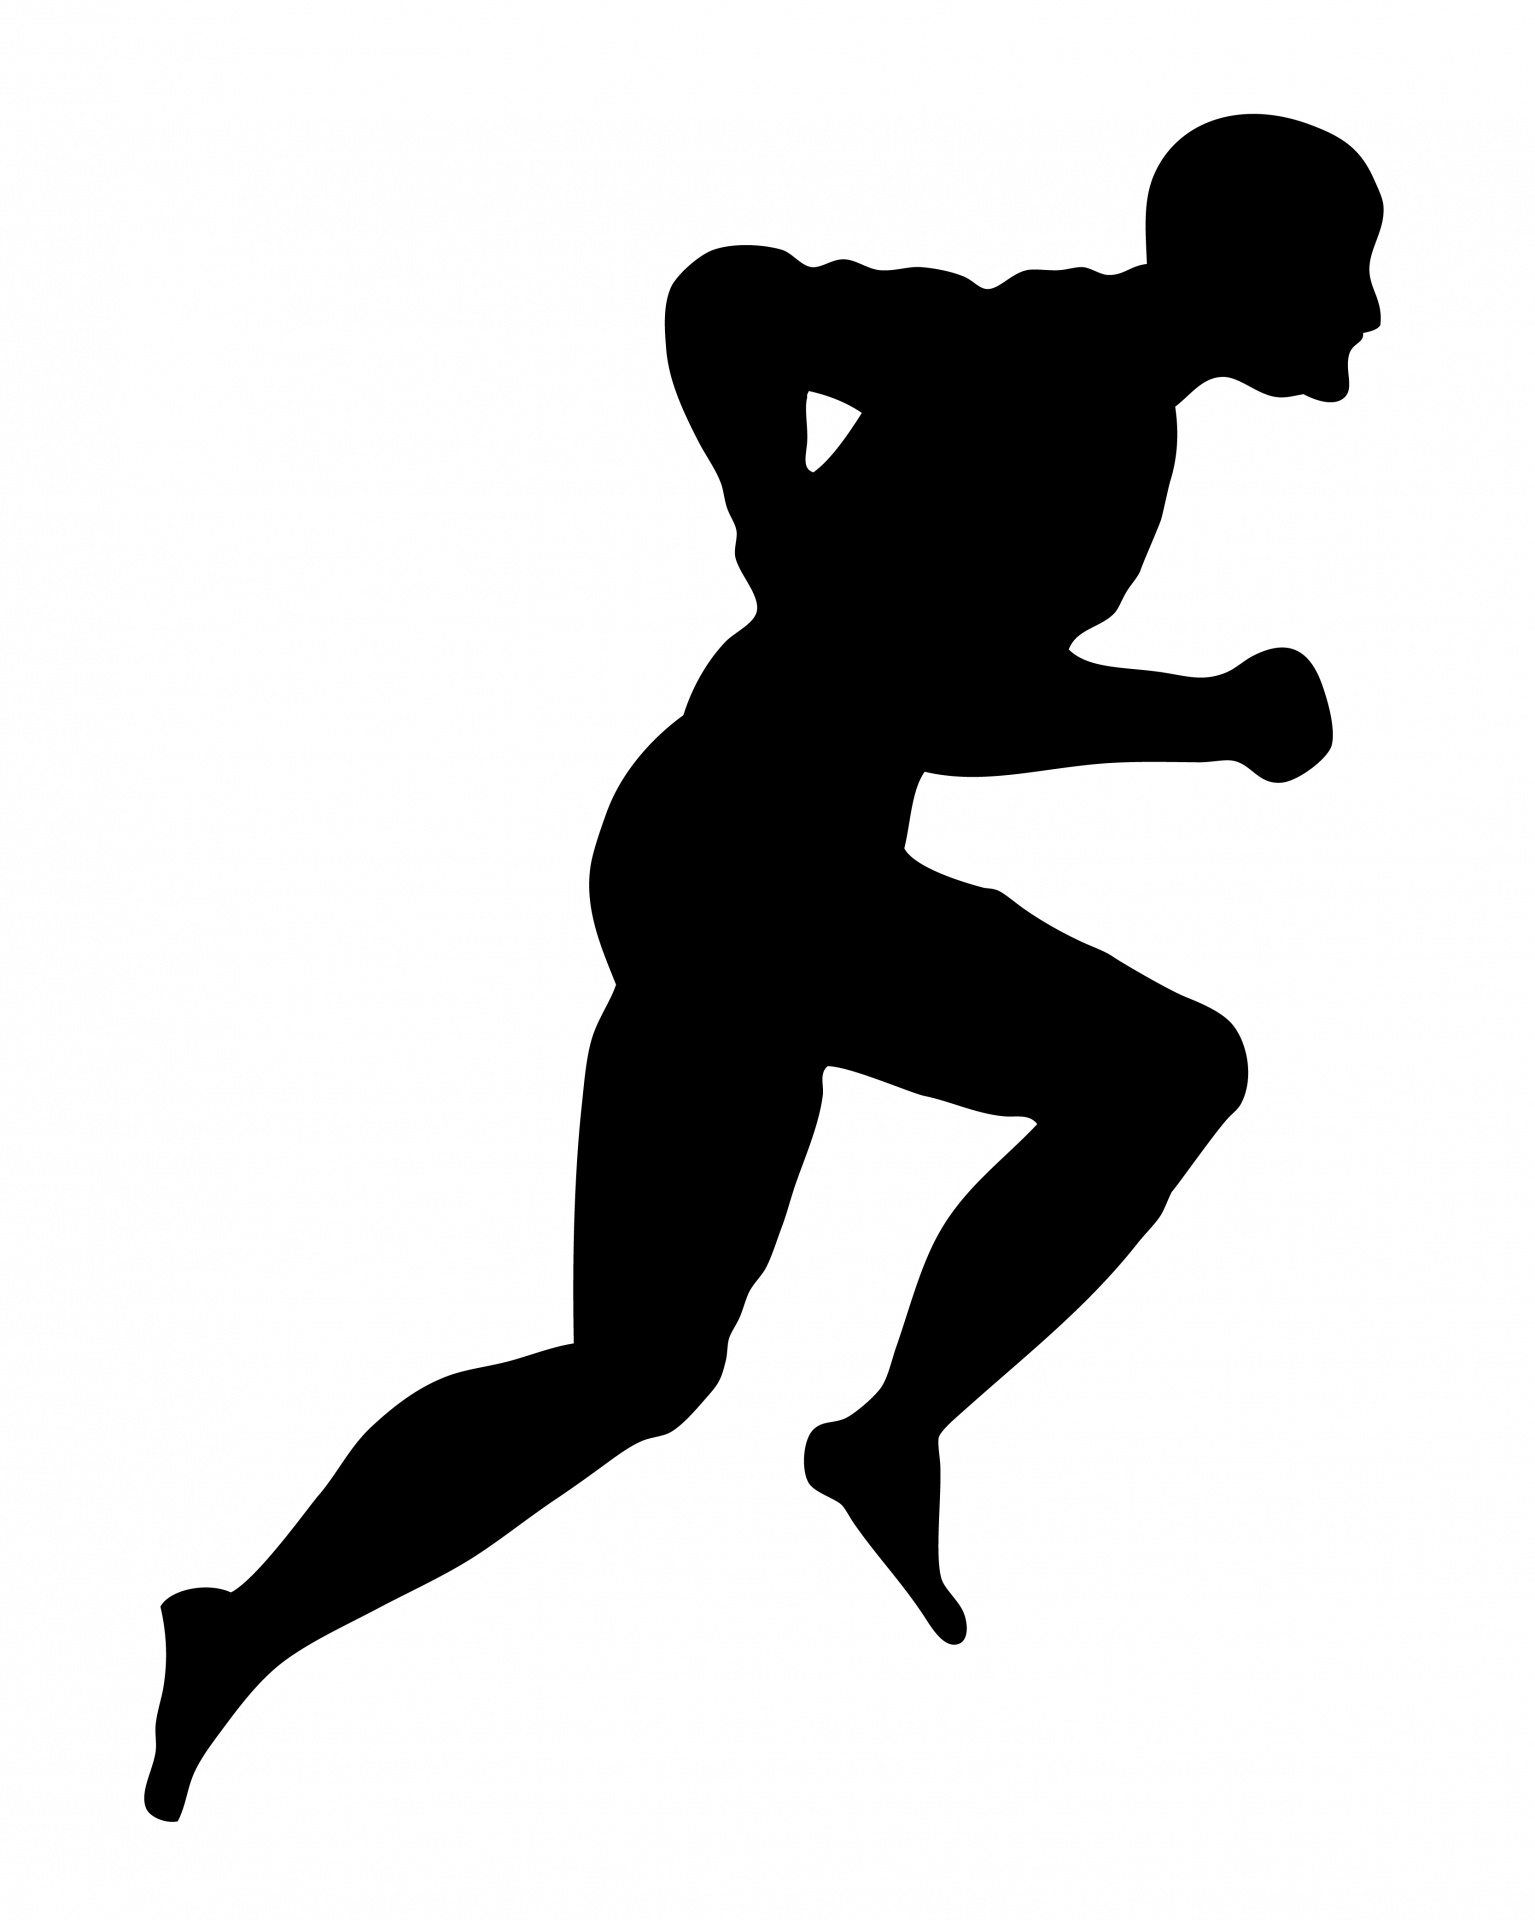 Small person running clipart